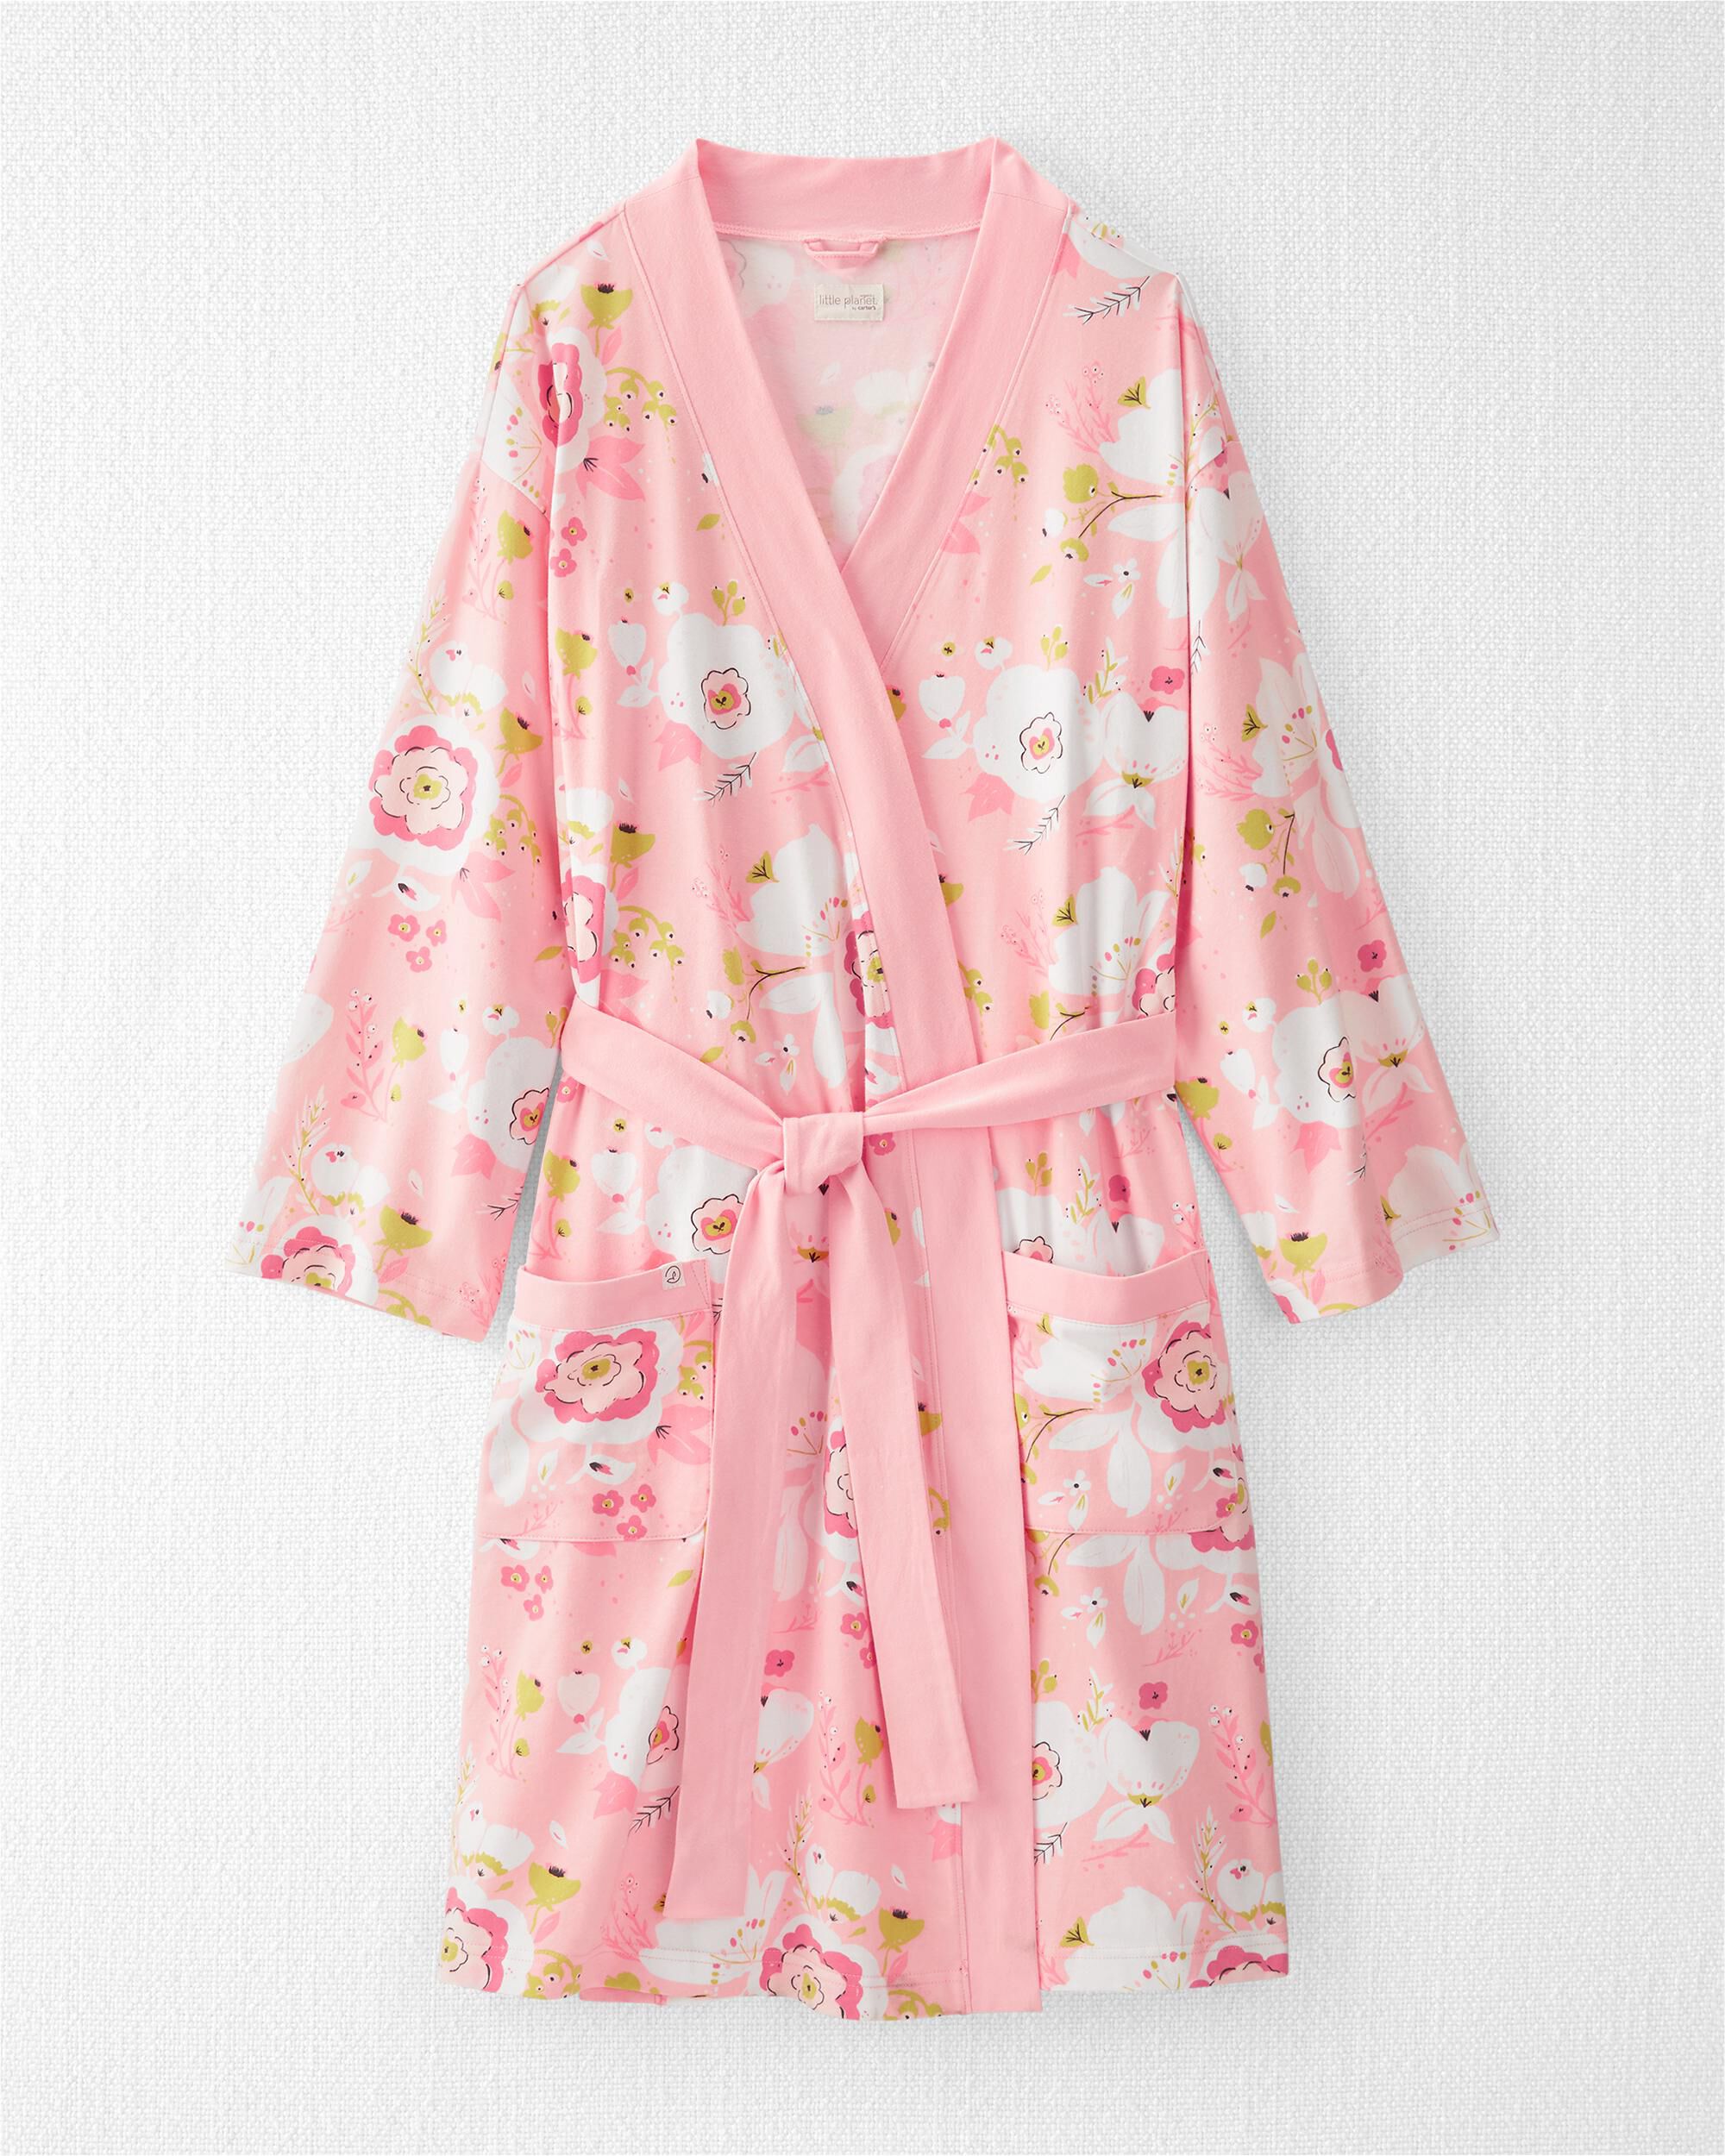 Carters Adult Organic Cotton Jersey Robe